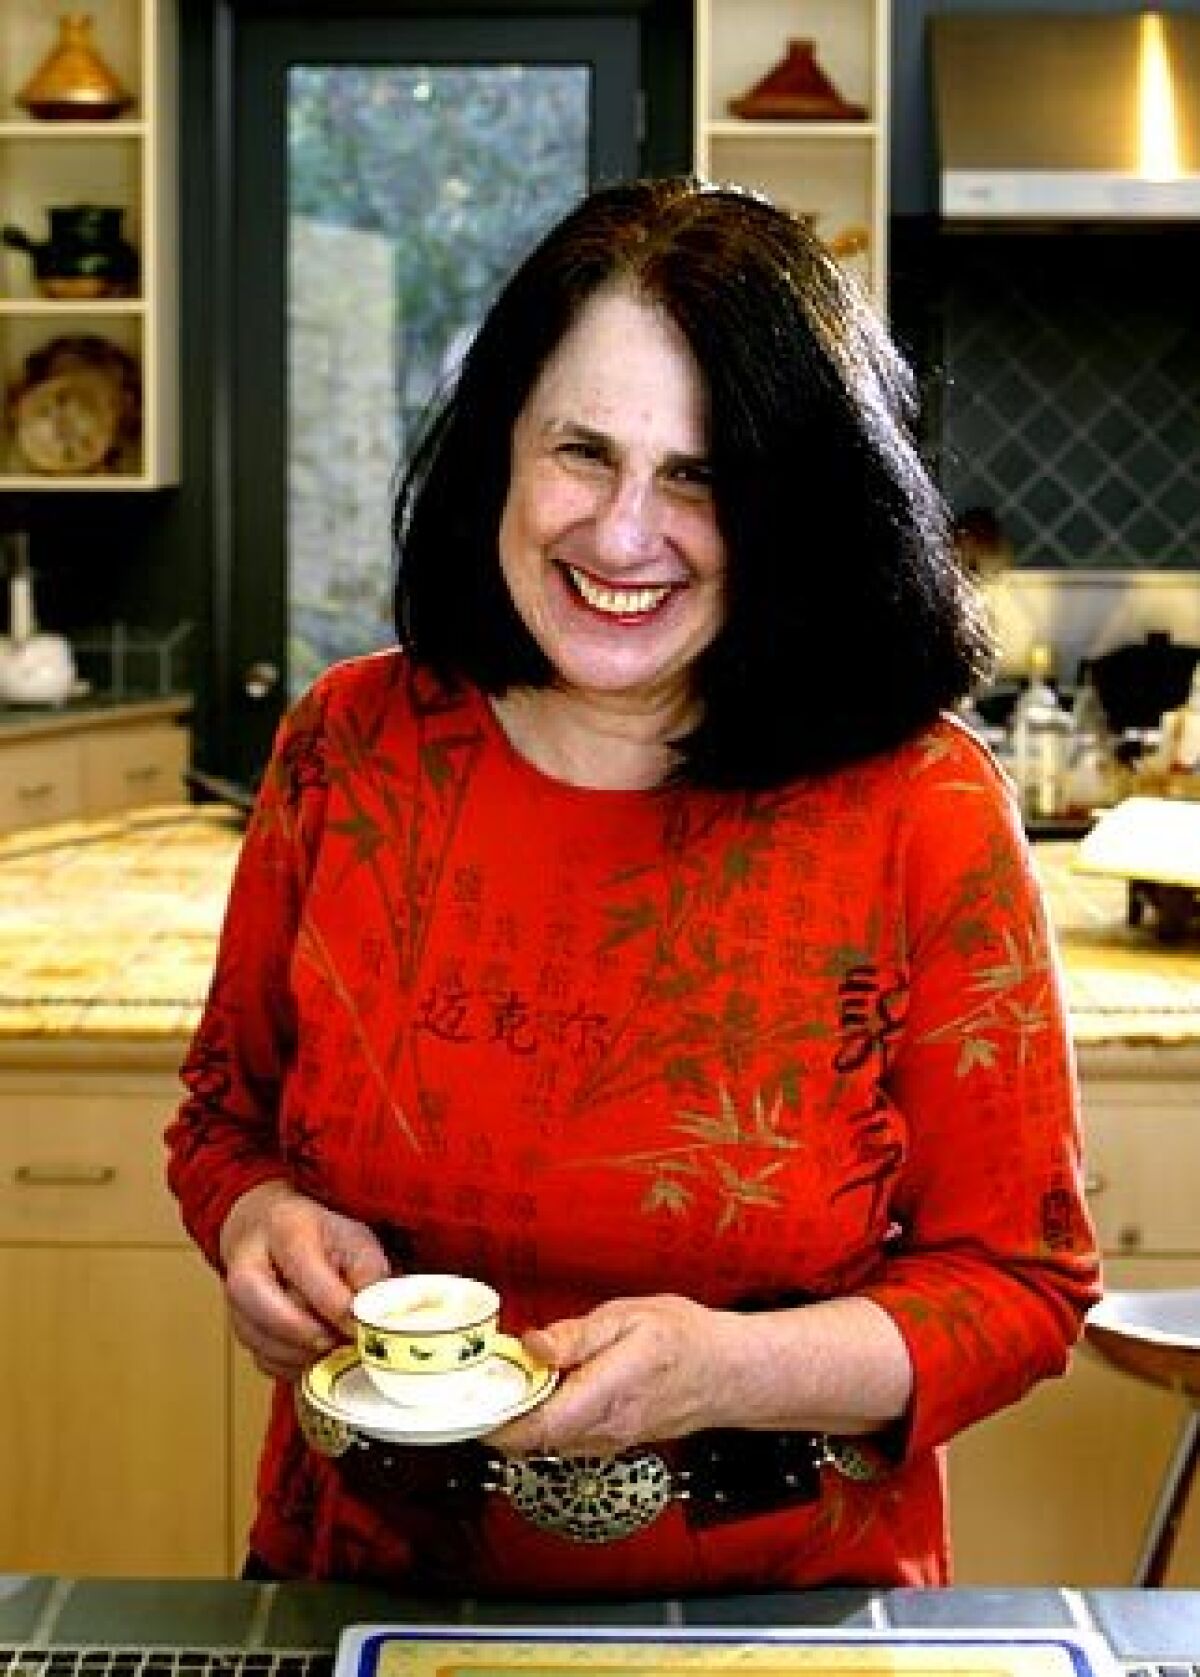 Cookbook author Paula Wolfert's fascination with clay pots began at age 19.